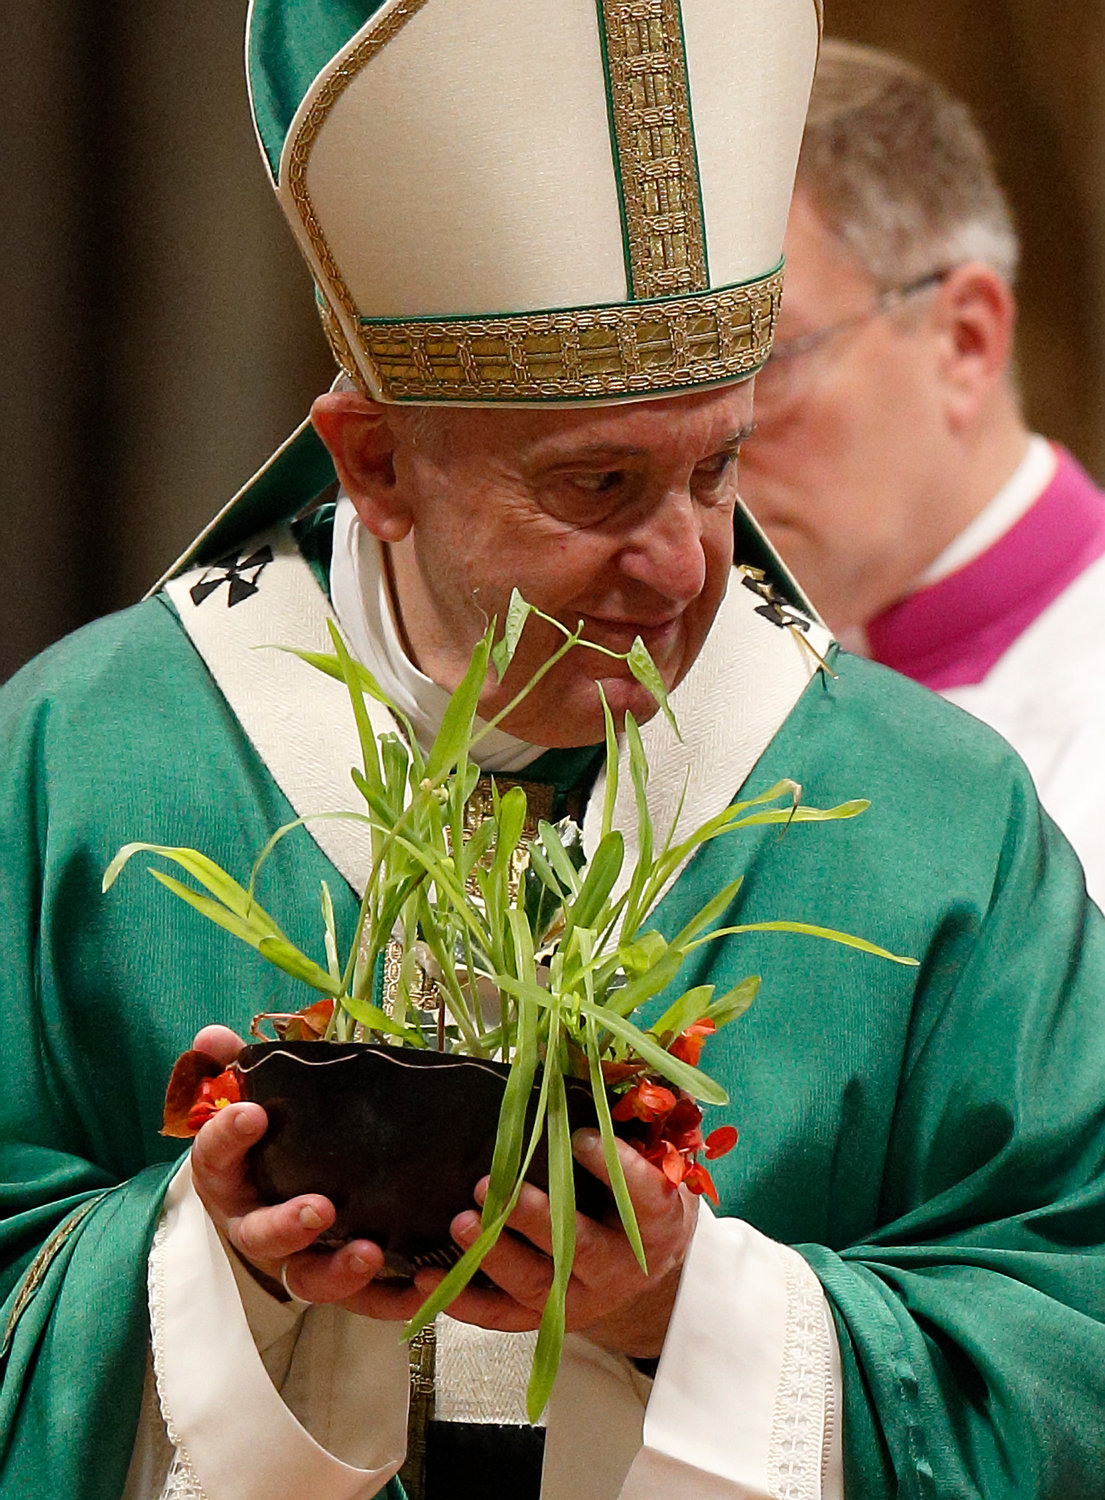 Pope Francis holds a plant presented during the offertory during the concluding Mass of the Synod of Bishops for the Amazon at the Vatican in this Oct. 27, 2019, file photo. The Vatican on Feb. 12 released the Pope’s apostolic exhortation, “Querida Amazonia” (Beloved Amazonia), which offers his conclusions from the synod.